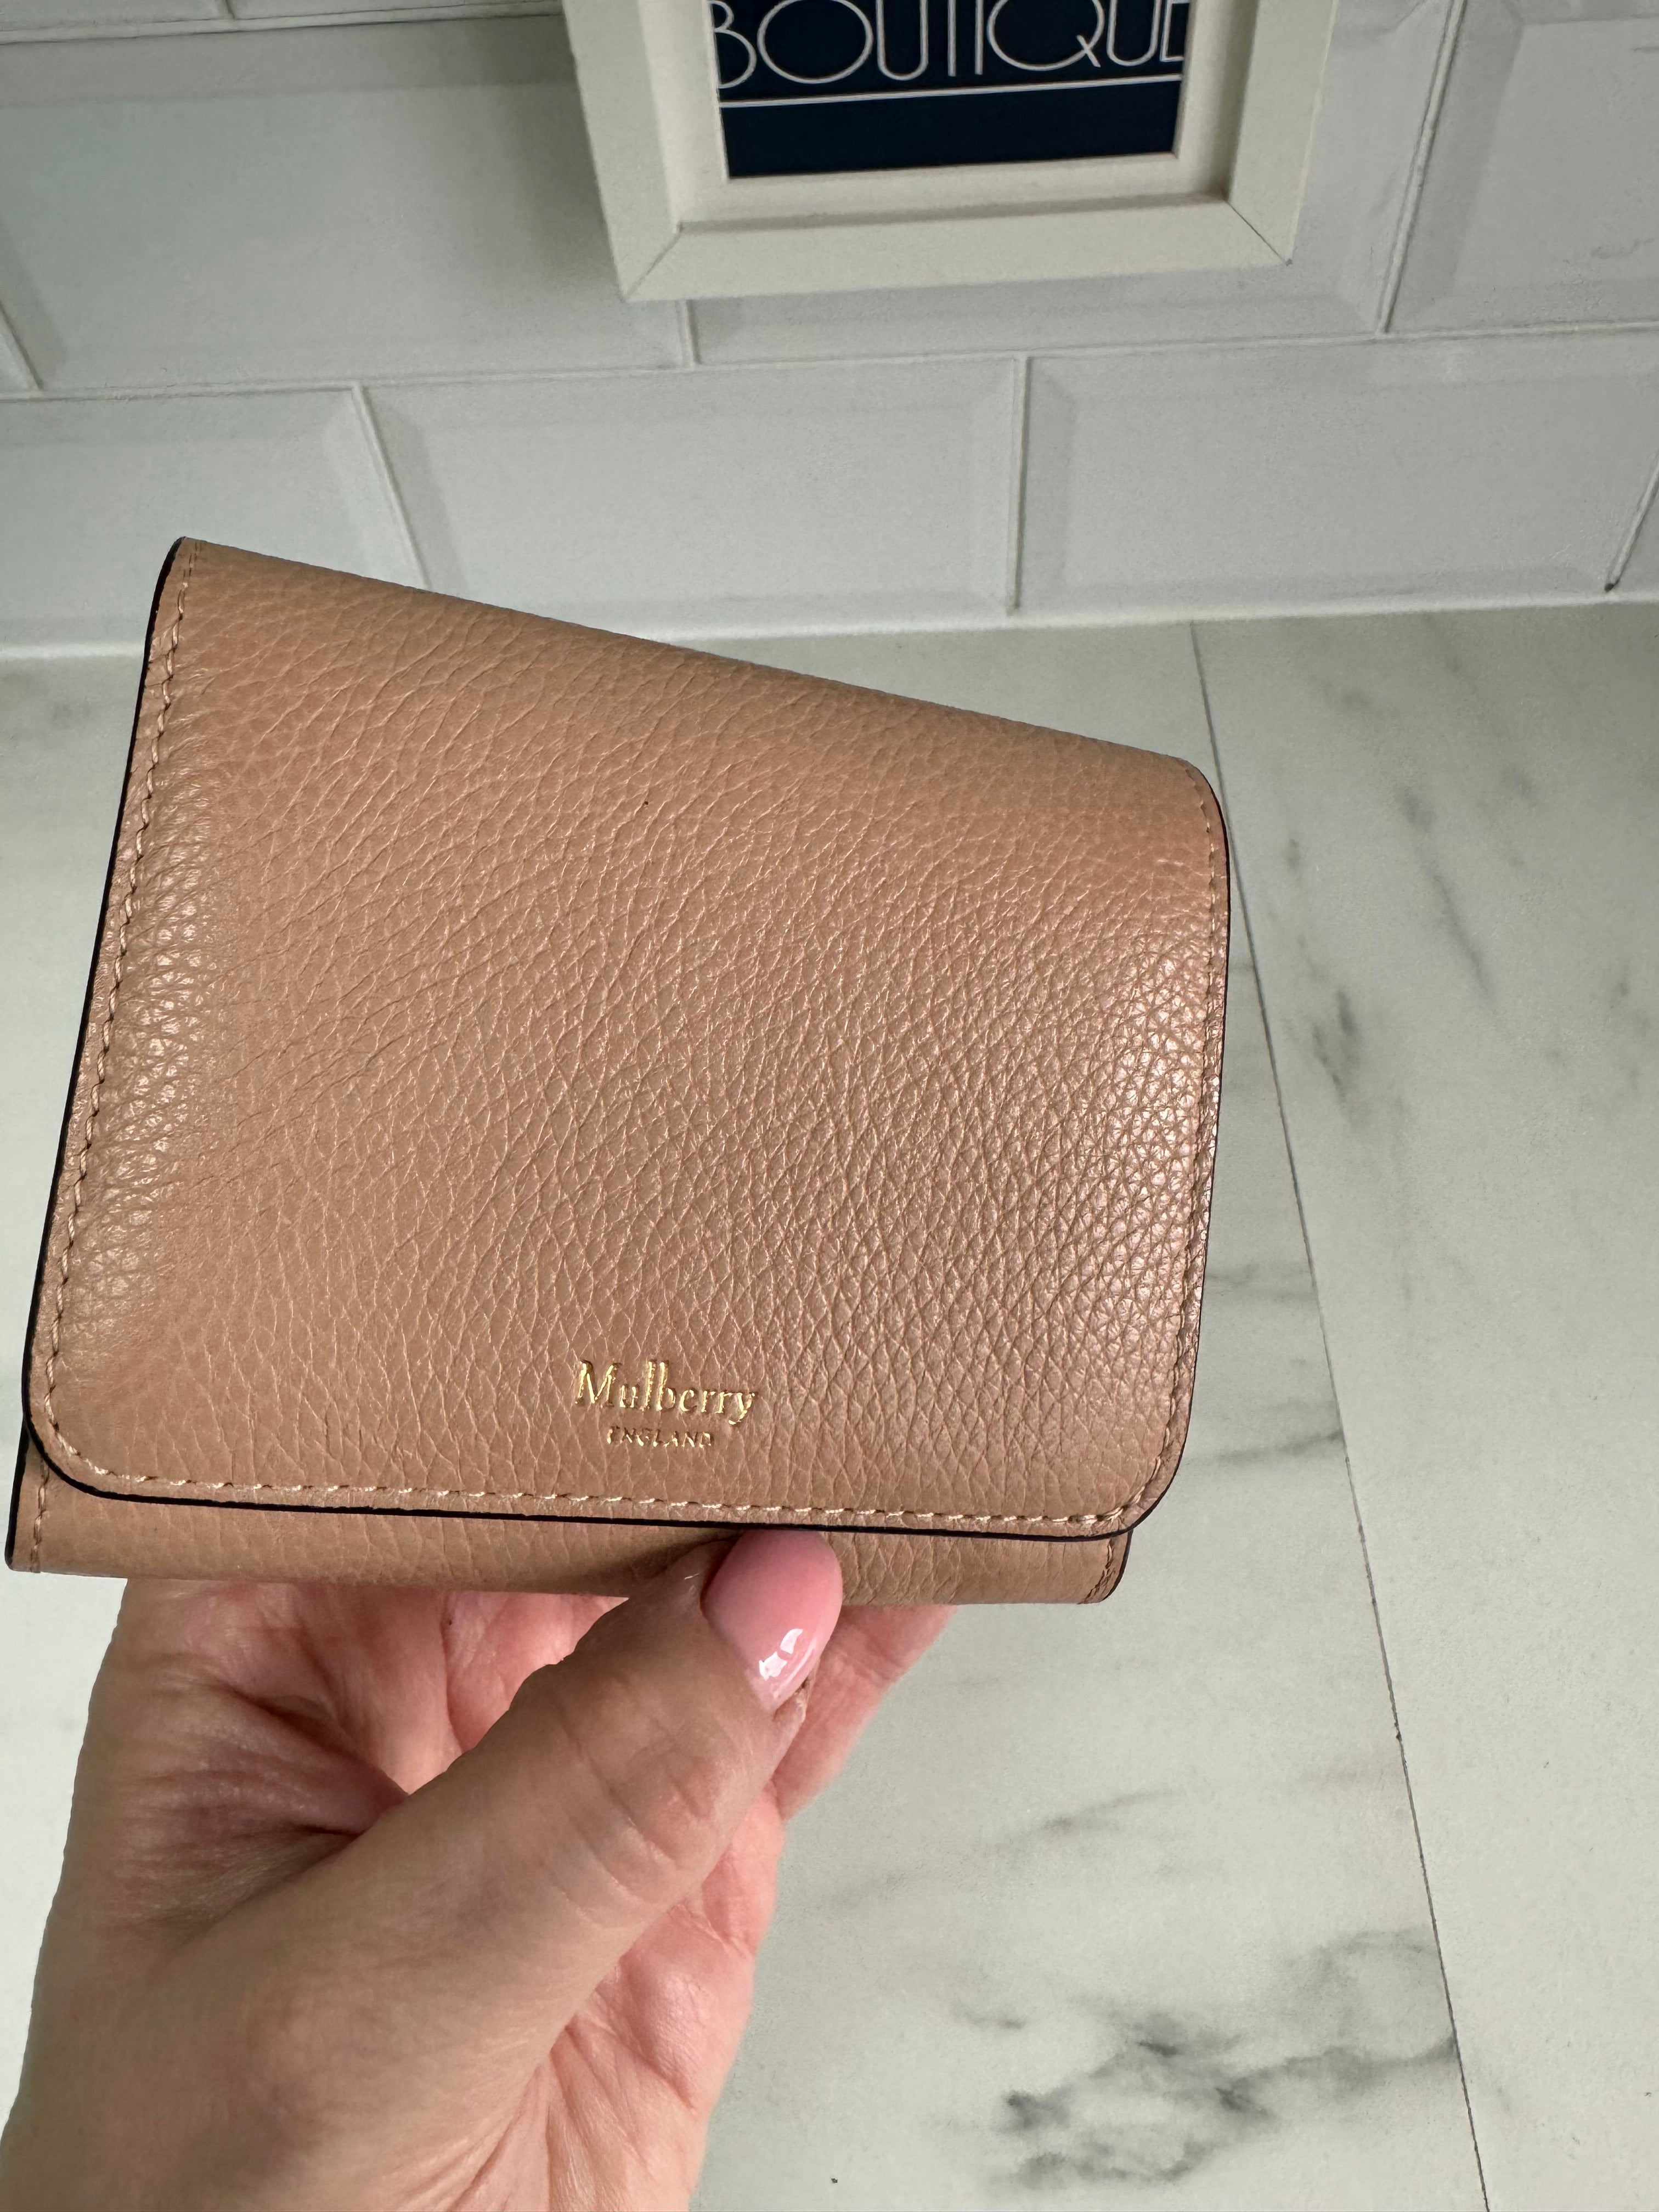 WALLET, Mulberry, leather. Vintage Clothing & Accessories - Auctionet